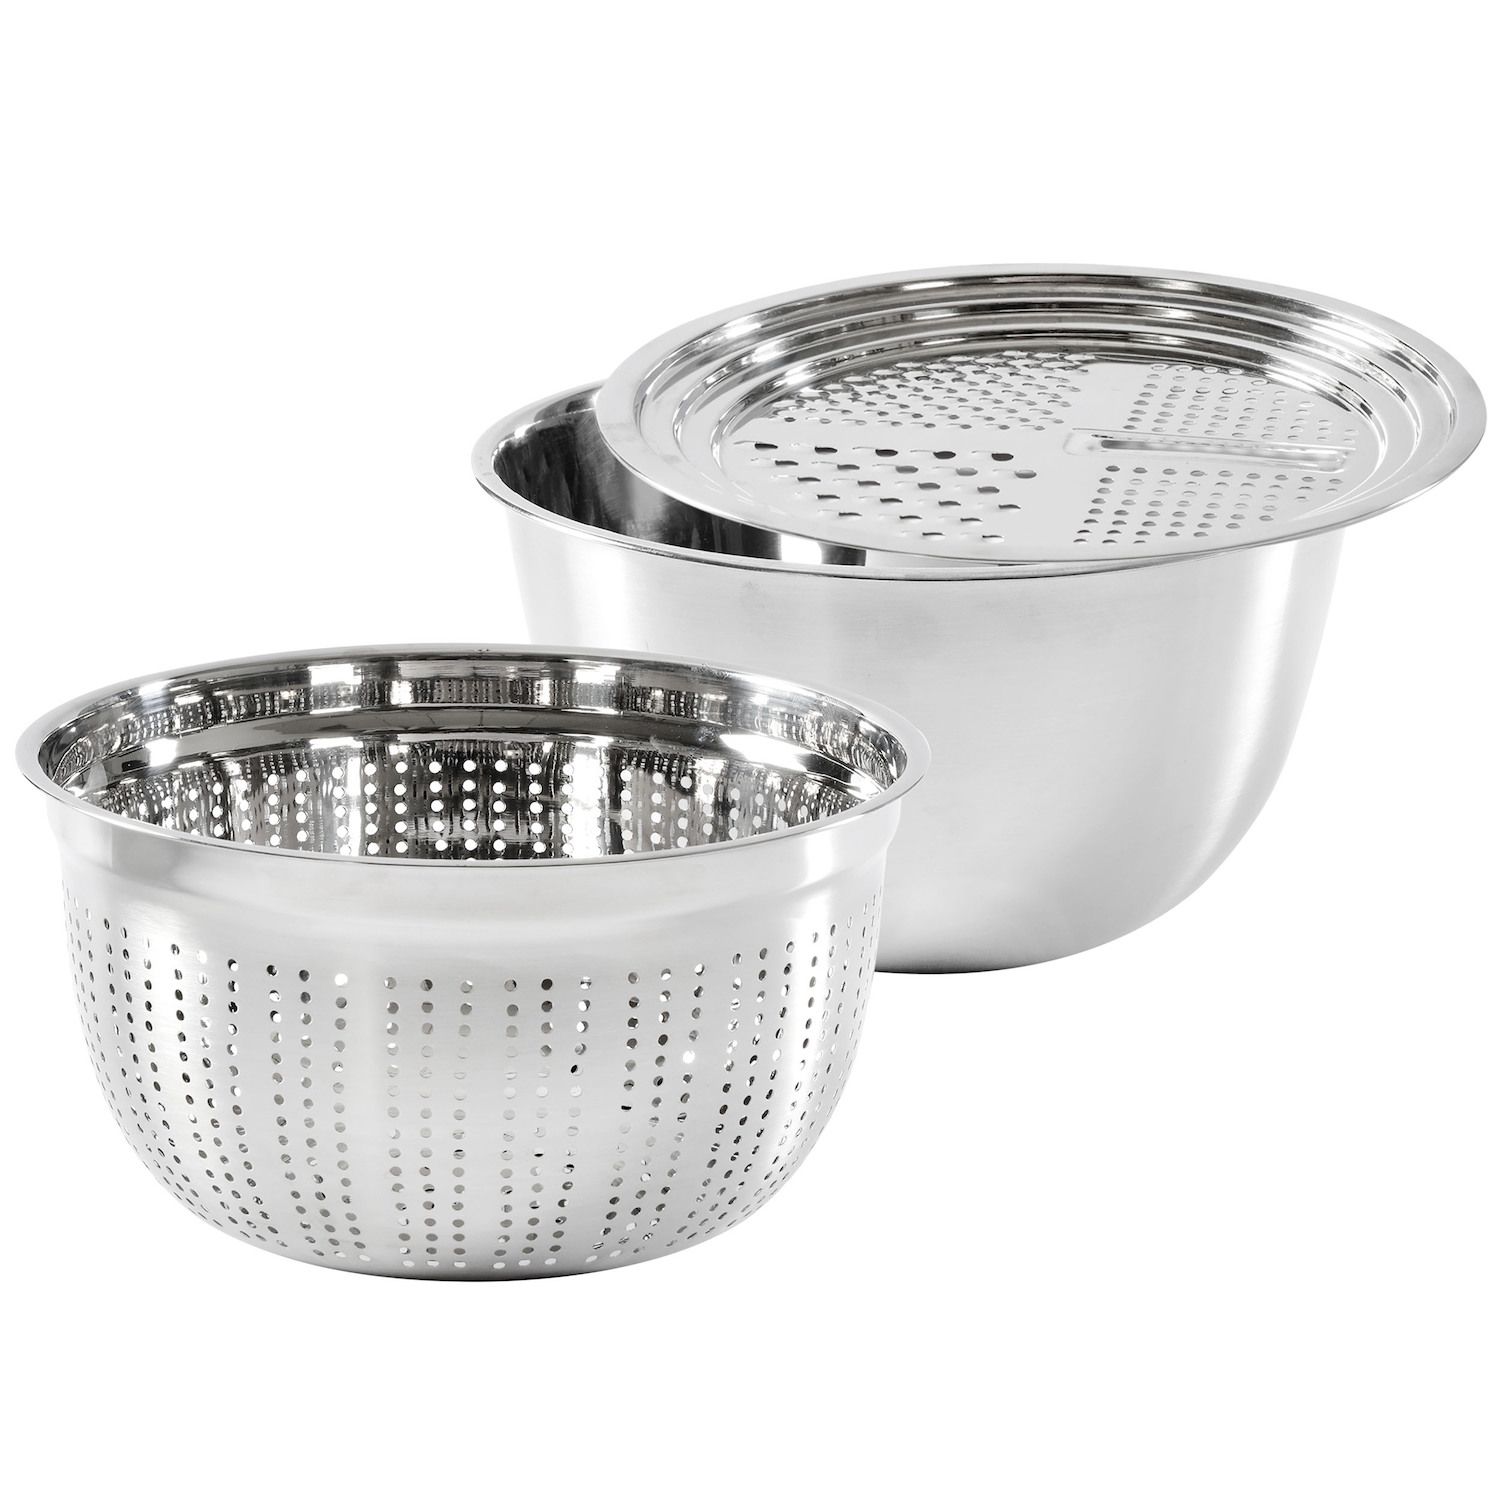 MegaChef 5-Piece Stainless Steel Silver Mixing Bowl Set with Lids